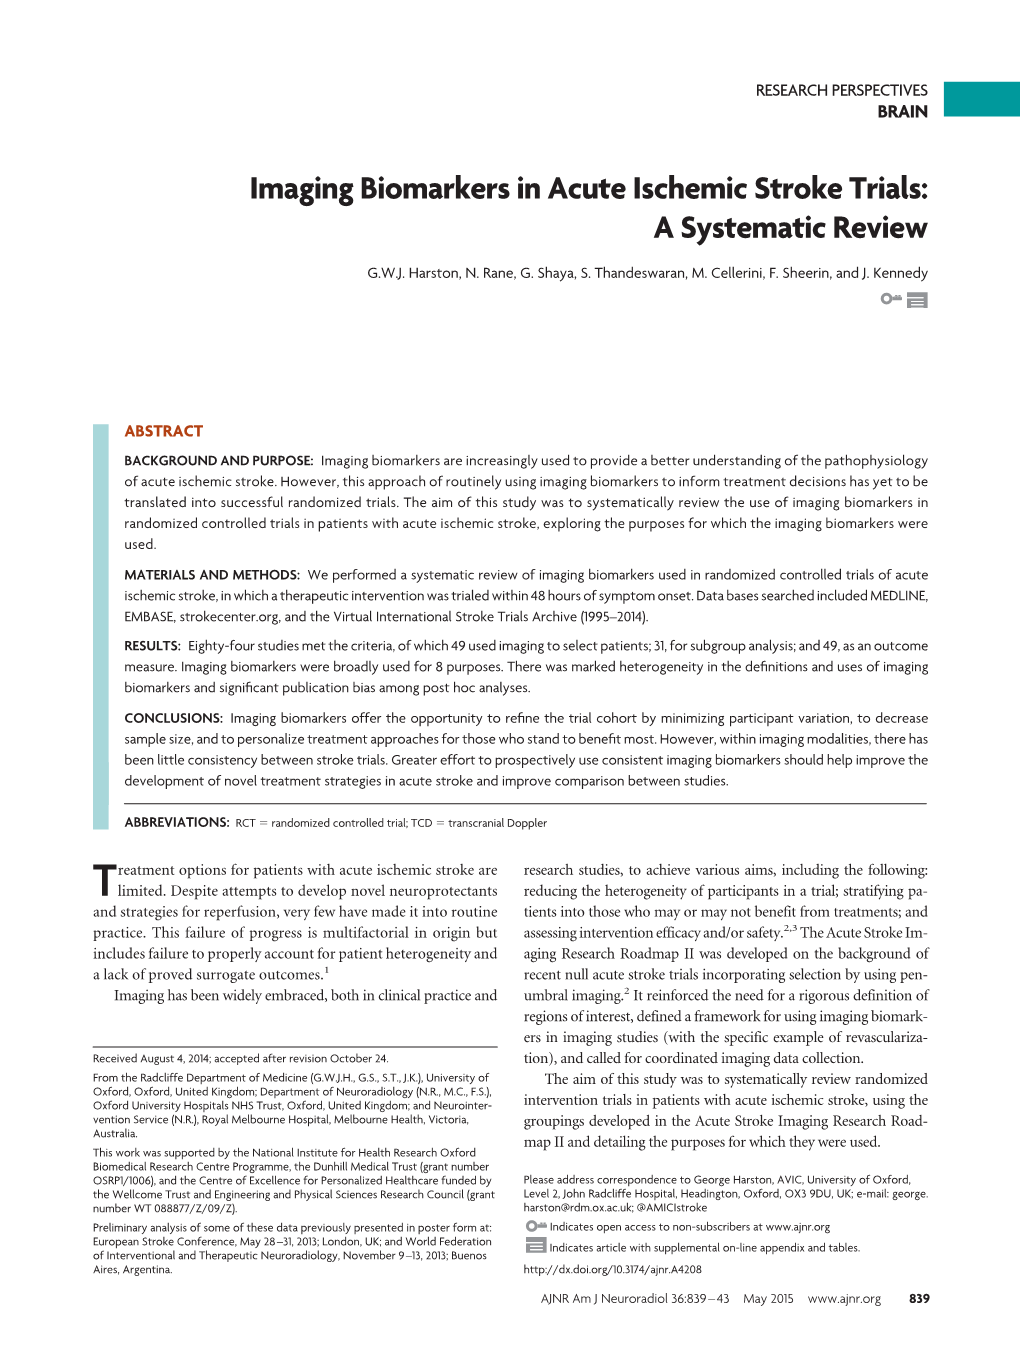 Imaging Biomarkers in Acute Ischemic Stroke Trials: a Systematic Review